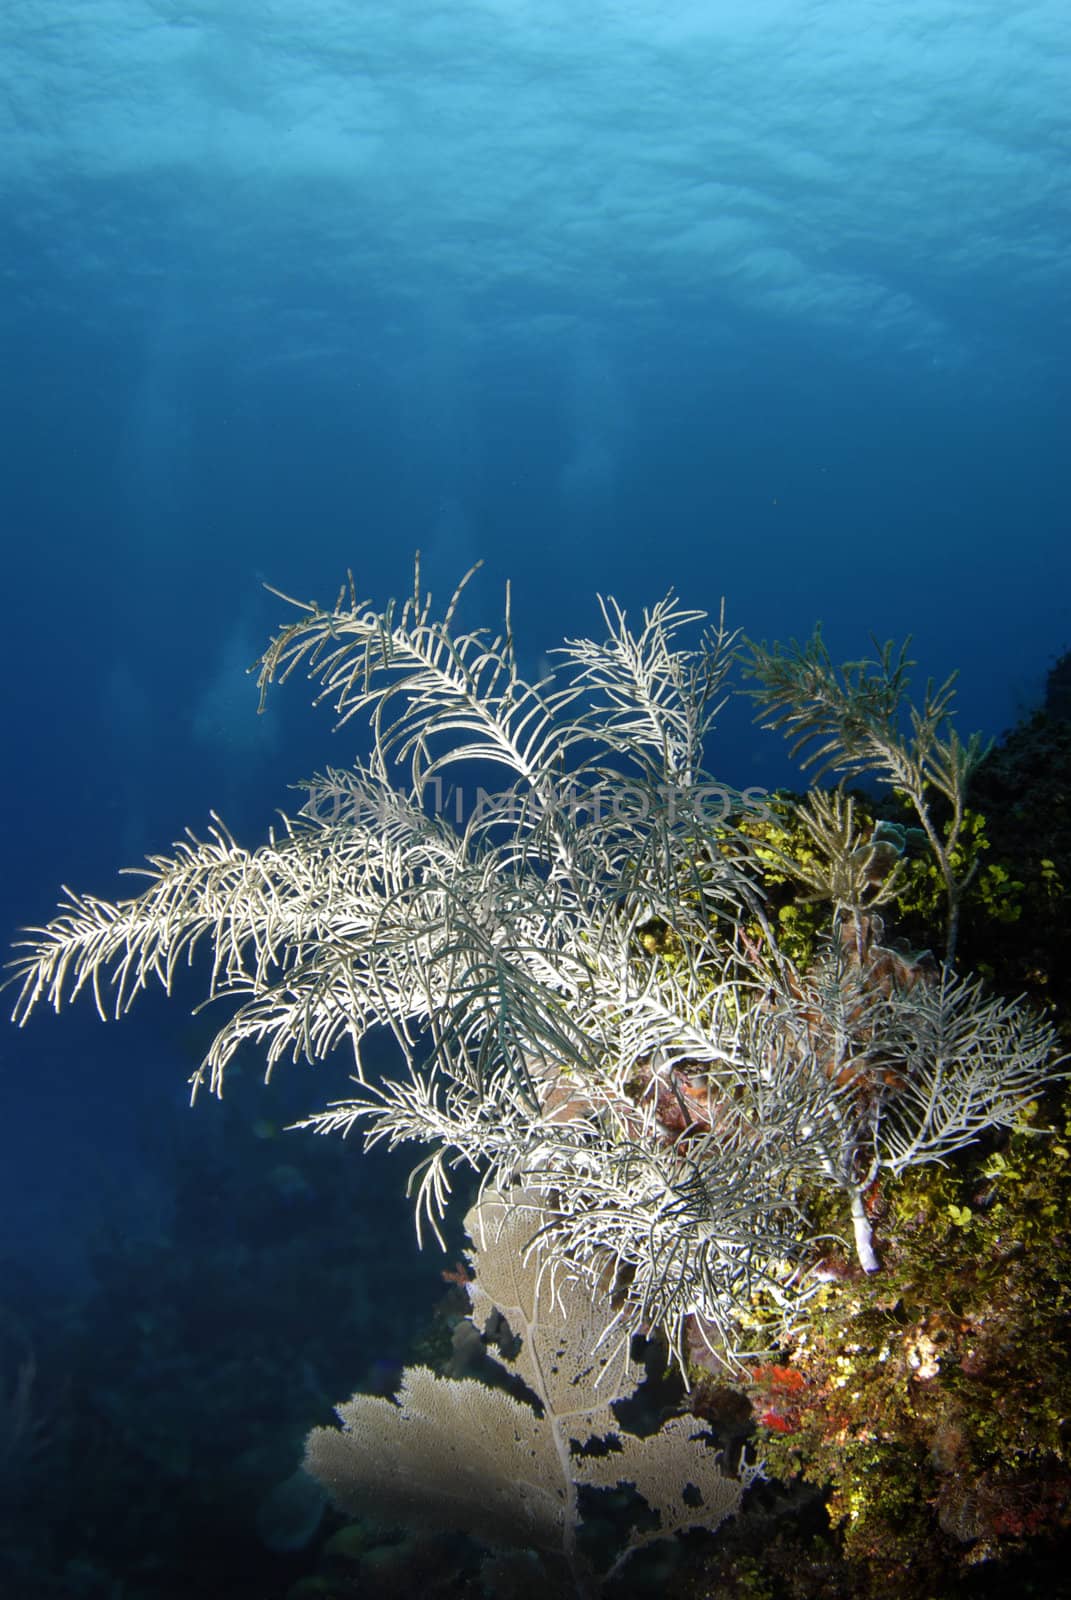 Tropical Seascape with Gorgonian coral (Holaxonia gorgonidae) and a Sea Fan (Gorgonia ventalina) in the foreground, with the ripples of the ocean surface in the background.